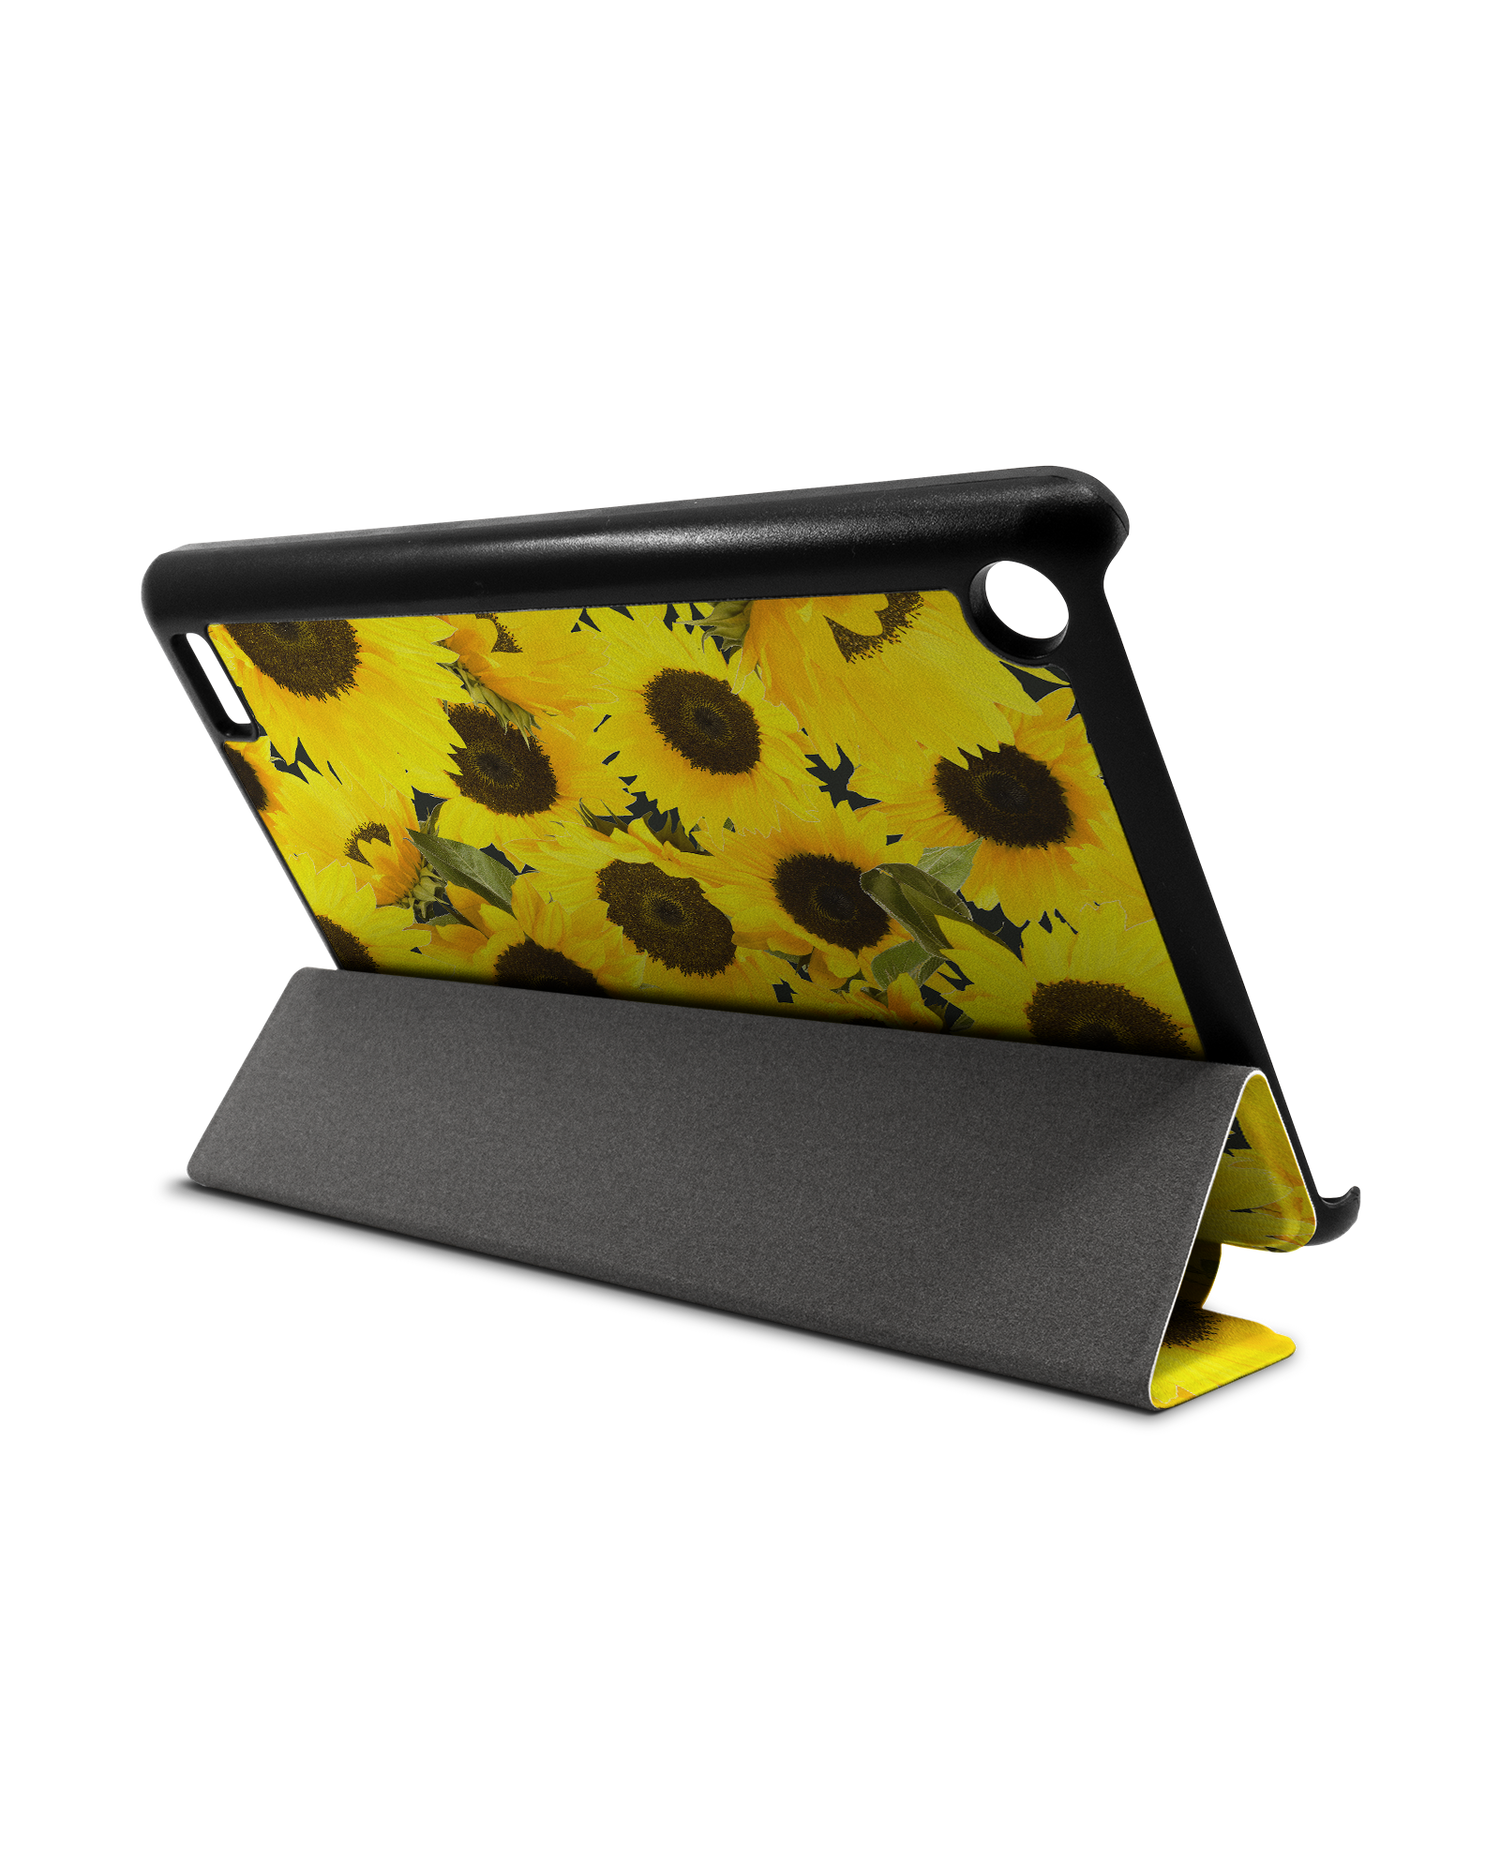 Sunflowers Tablet Smart Case for Amazon Fire 7: Used as Stand